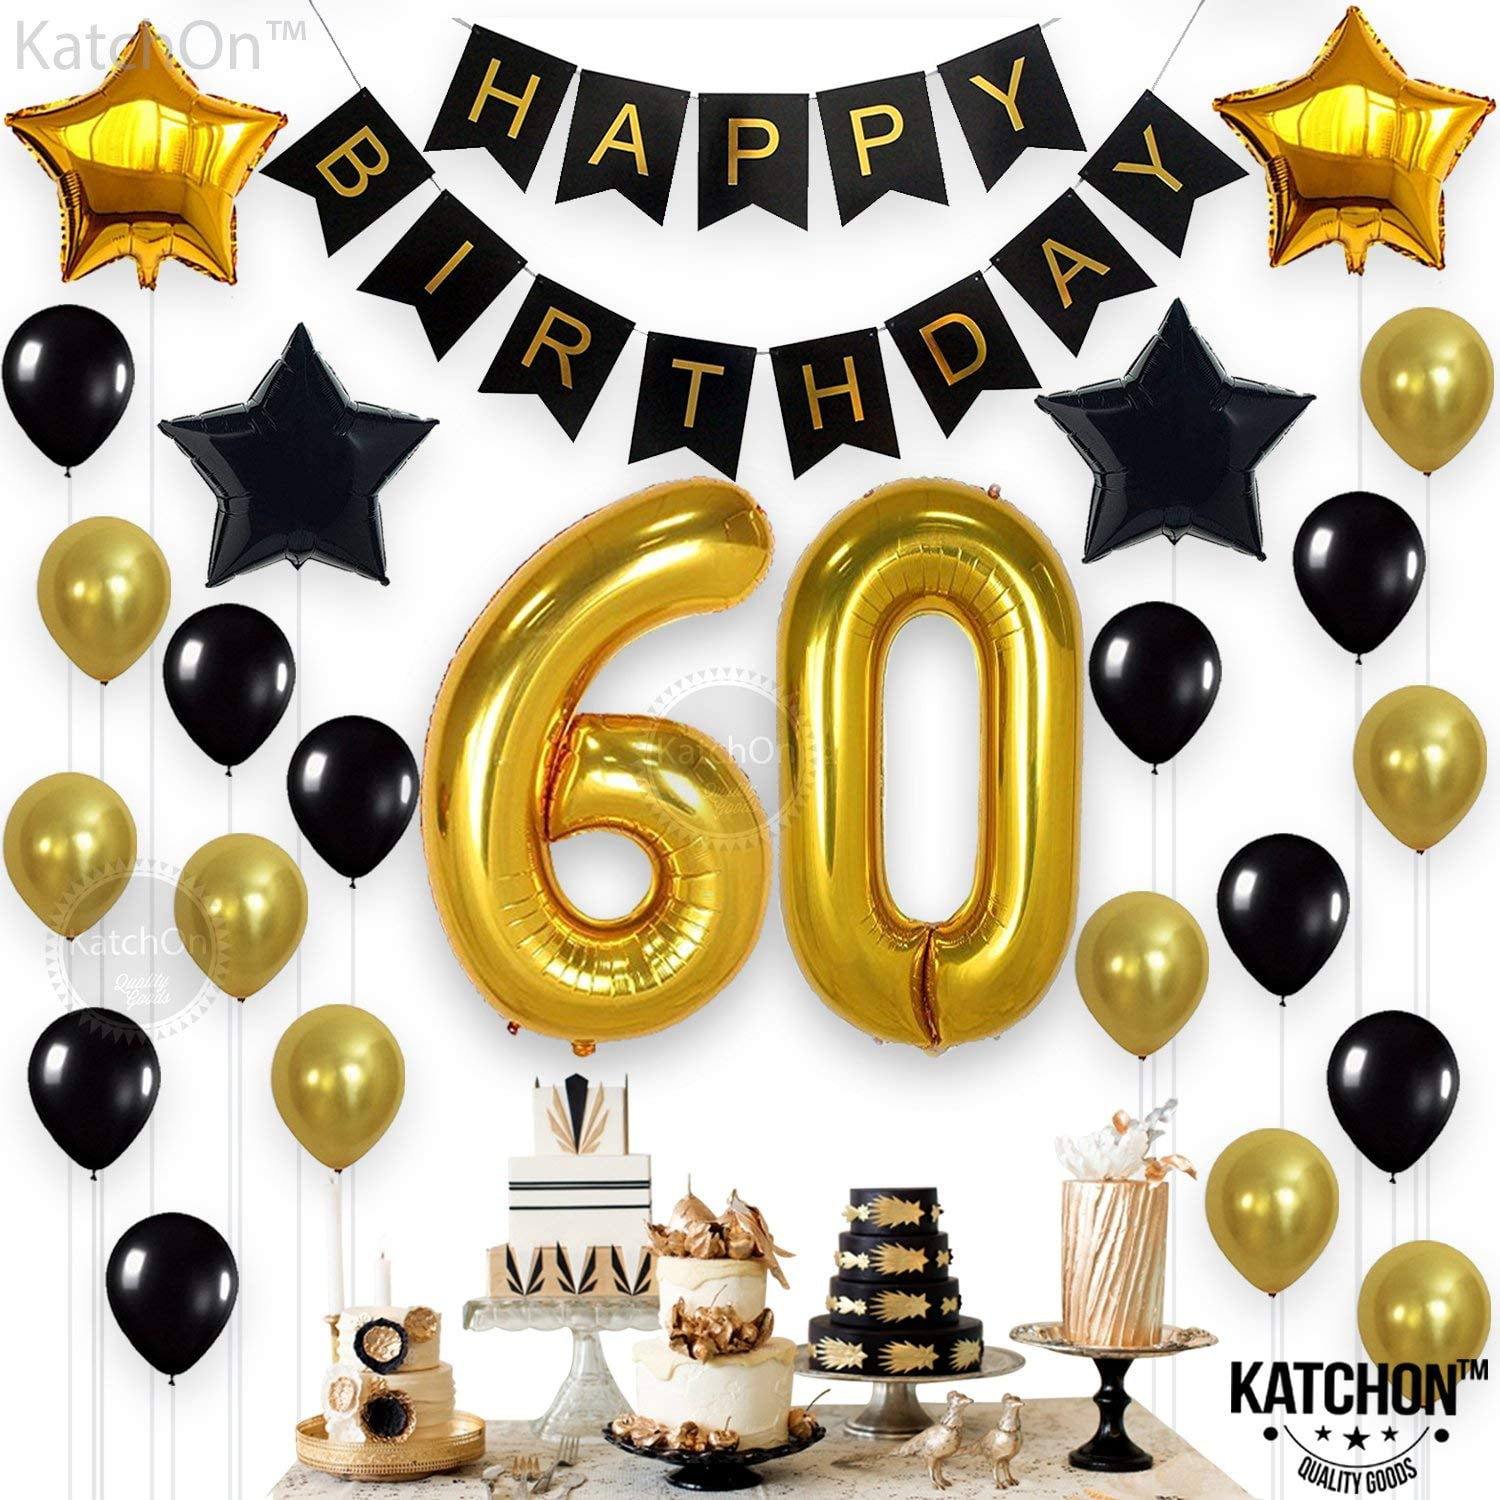 AGE 60 BLACK & GOLD HAPPY BIRTHDAY PARTY DECORATIONS 60th TABLEWARE cp 